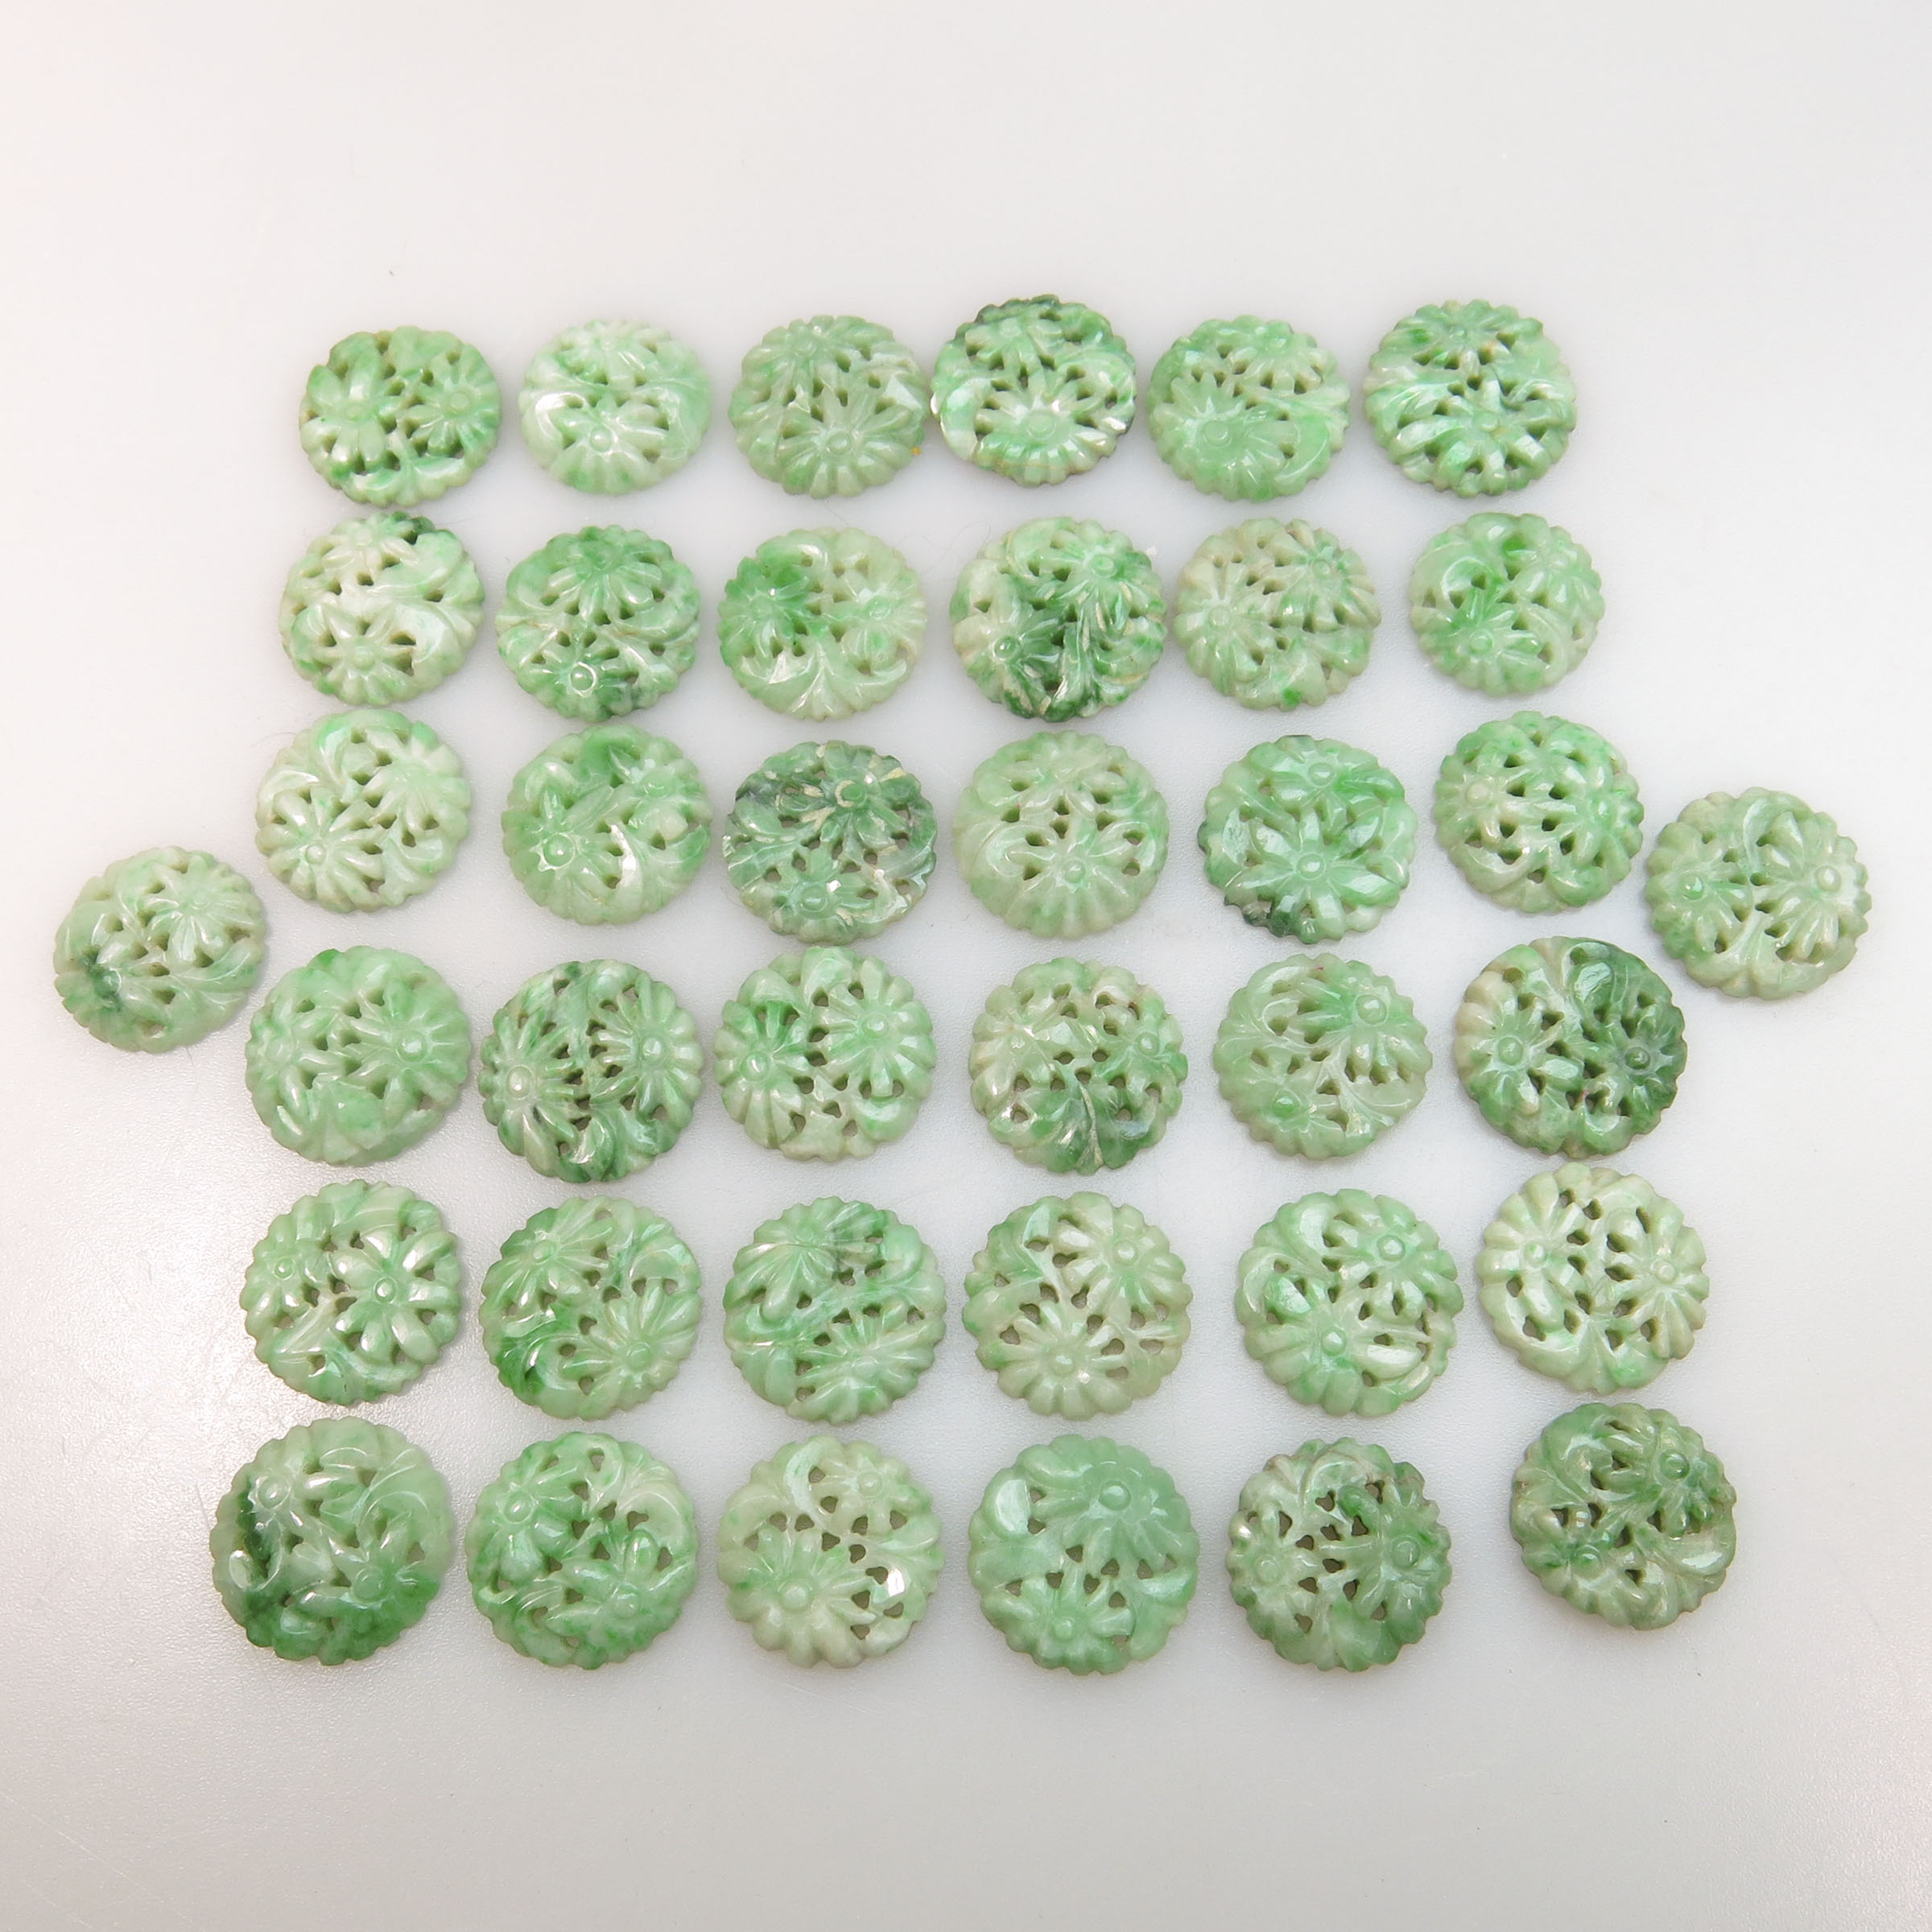 38 Carved And Pierced Circular Jadeite Panels